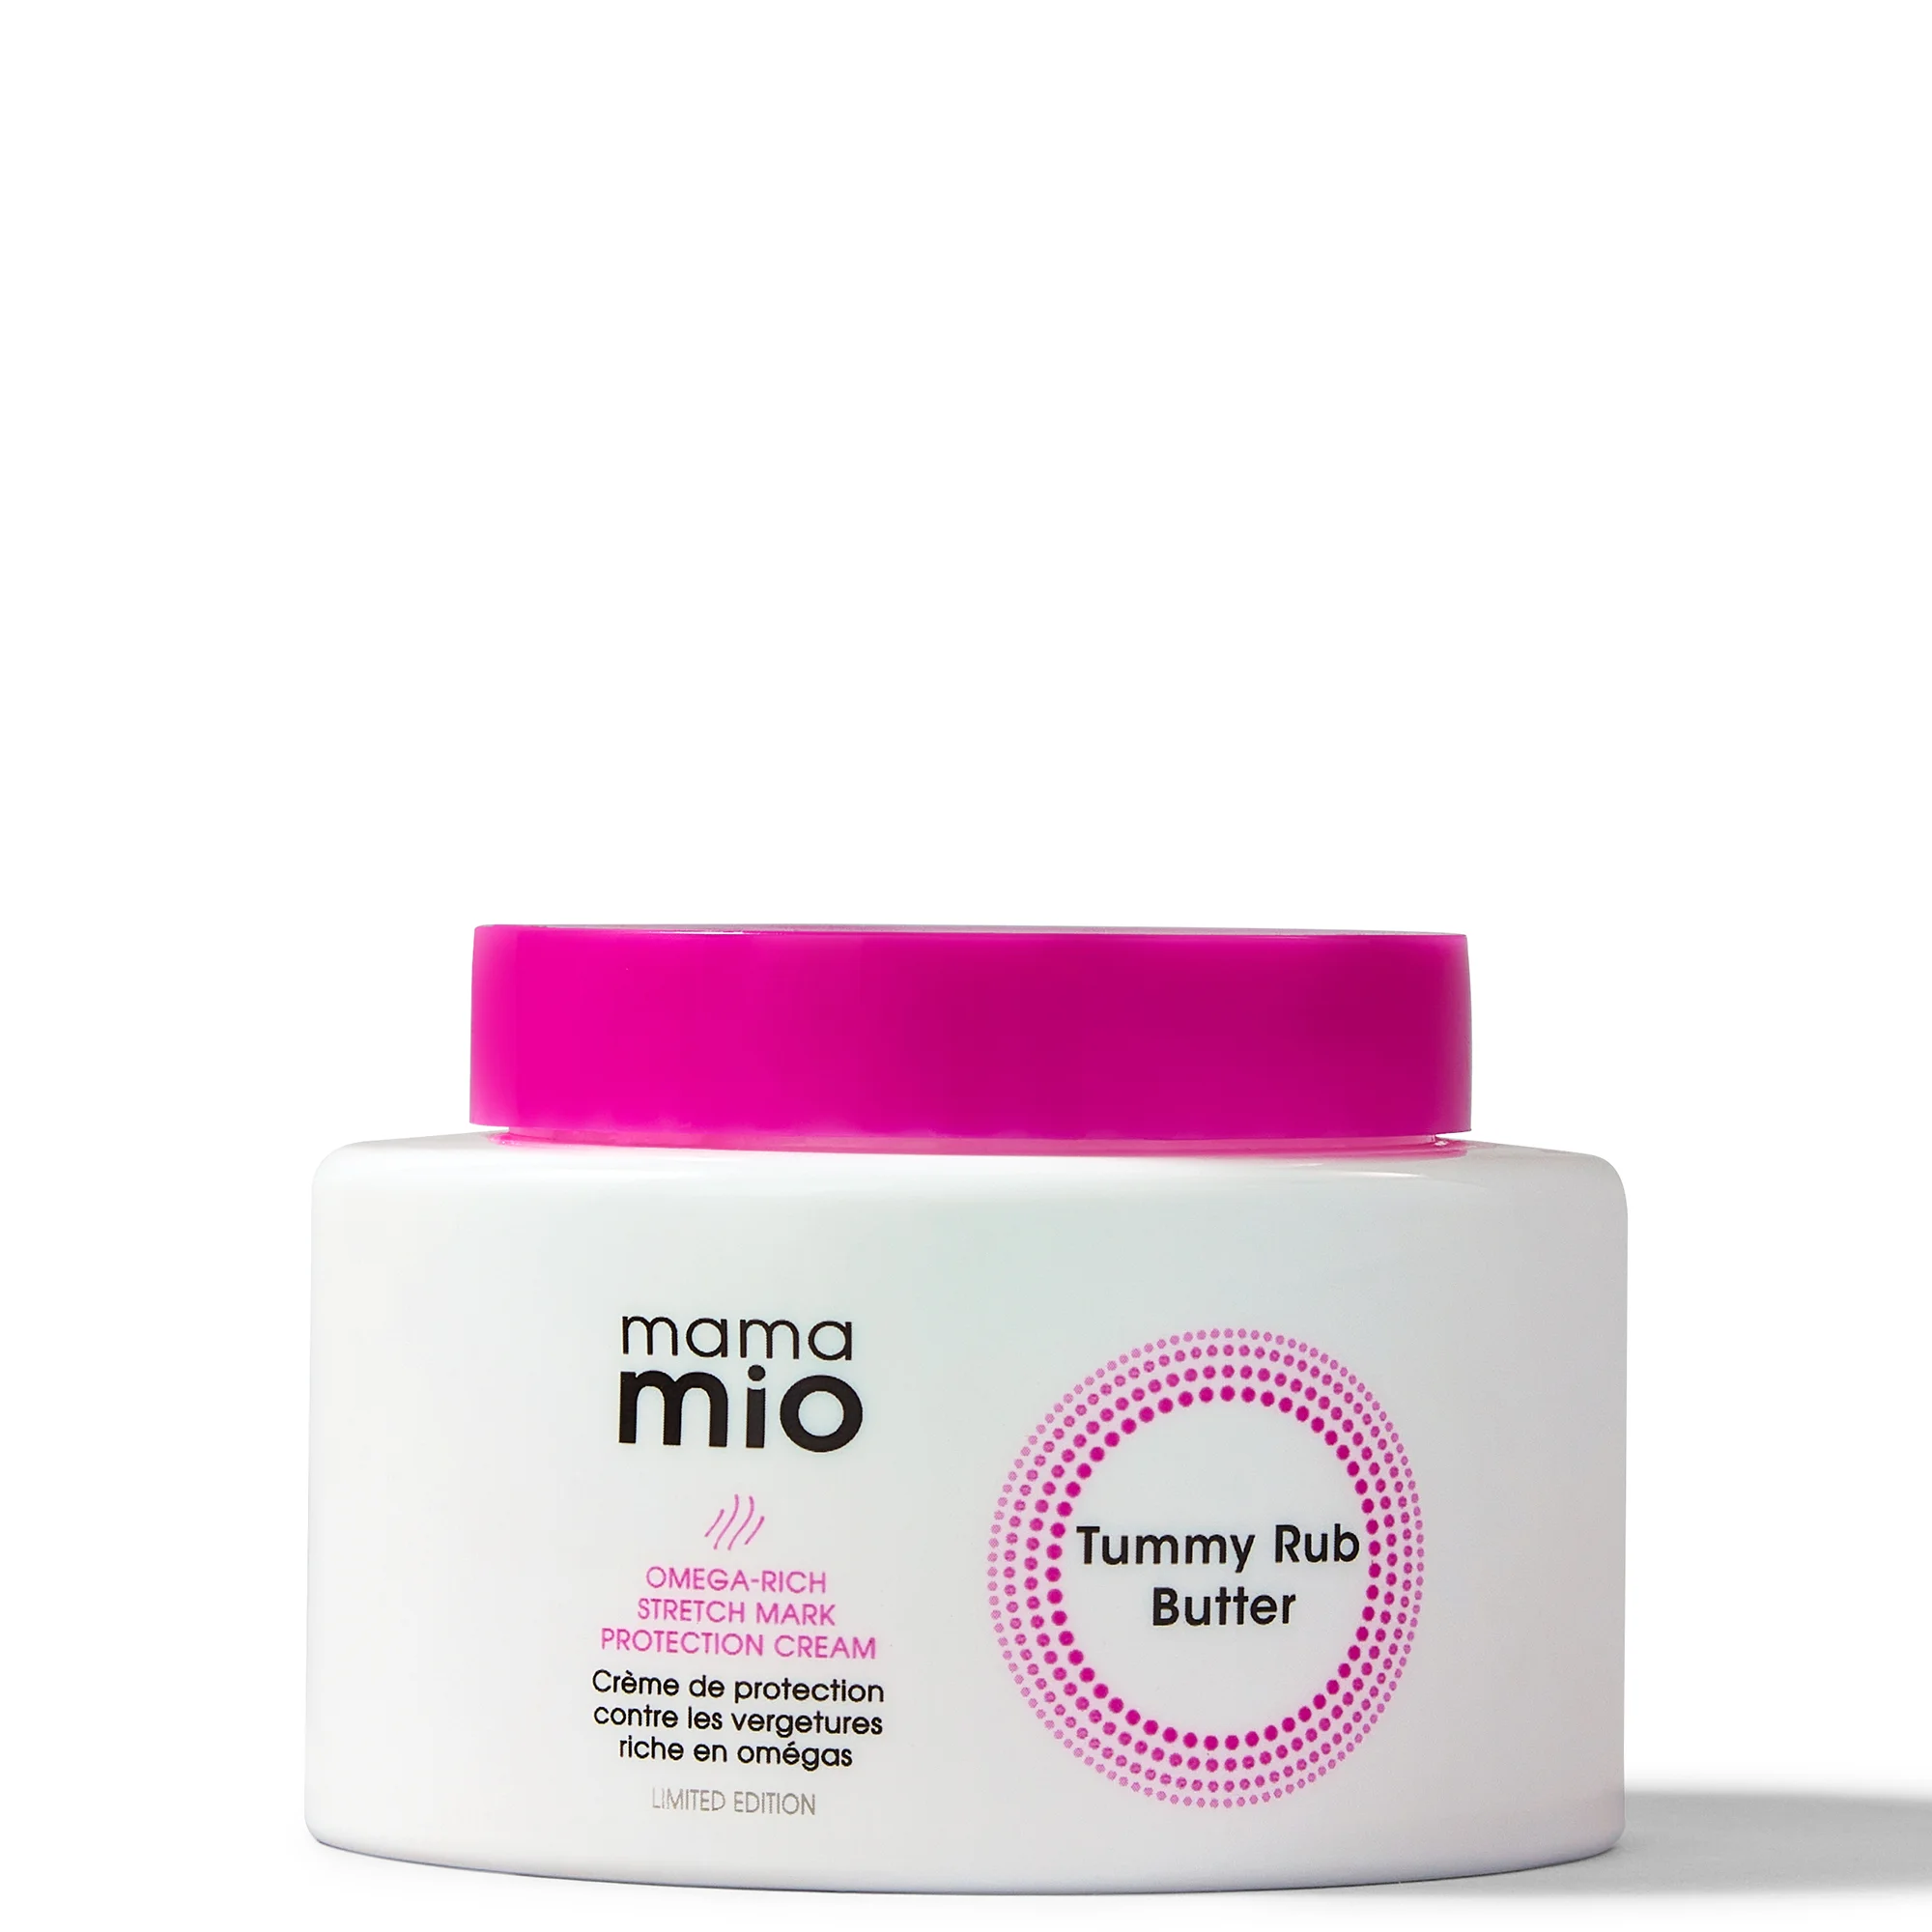 Mama Mio Limited Edition Tummy Rub Butter Cocoabean & Sandalwood Image 1